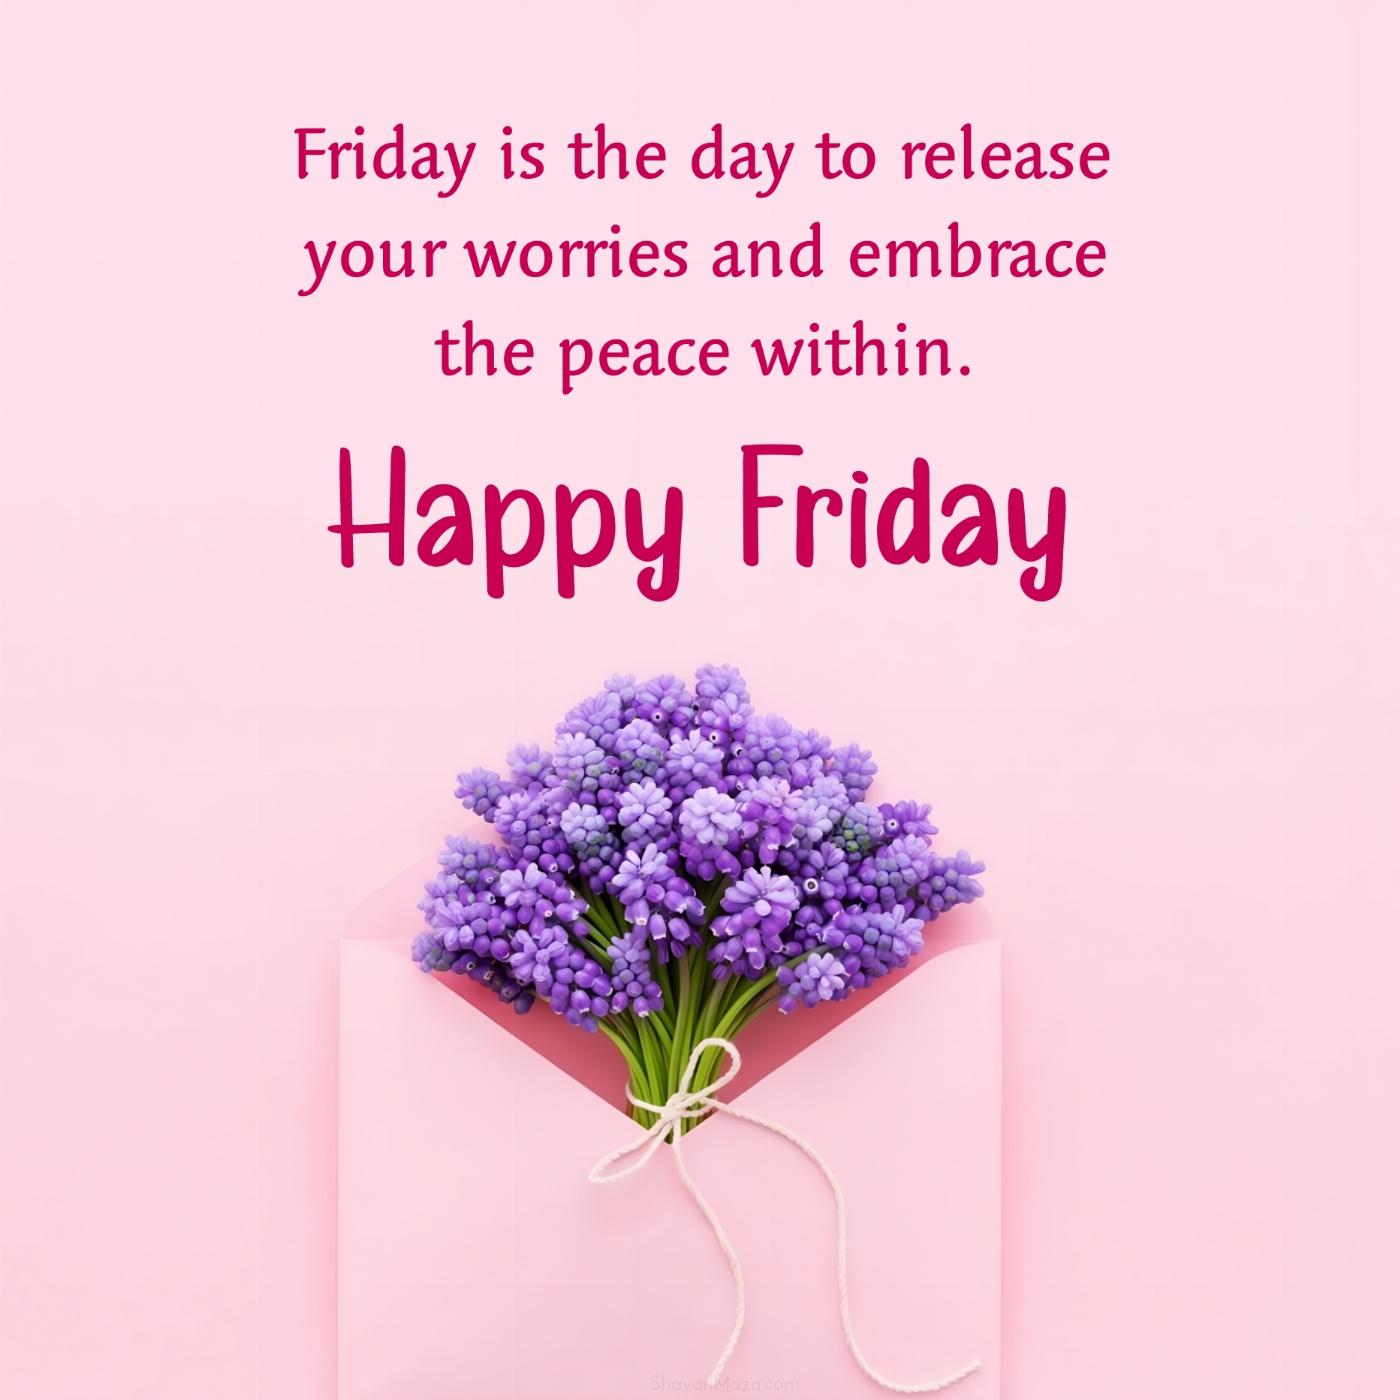 Friday is the day to release your worries and embrace the peace within